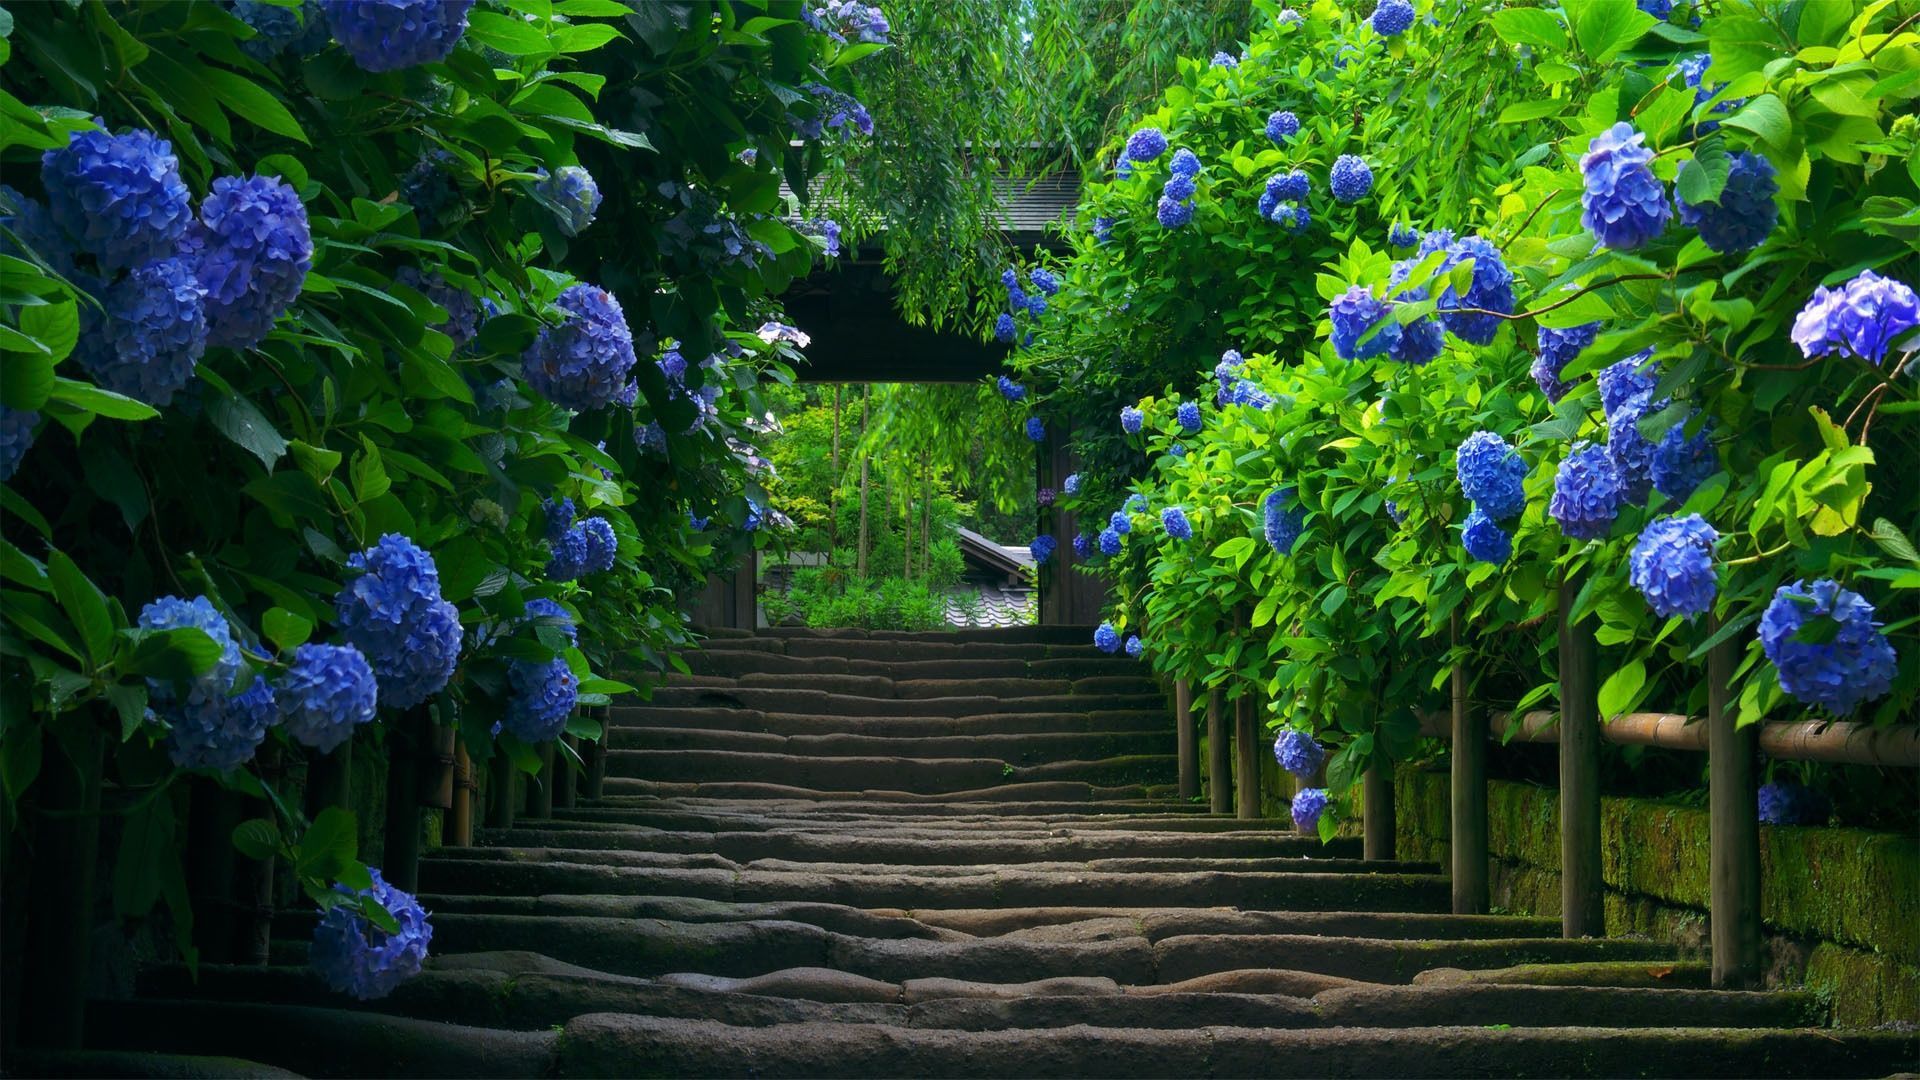 Stairs blue flowers desktop wallpapers and backgrounds Stairs blue